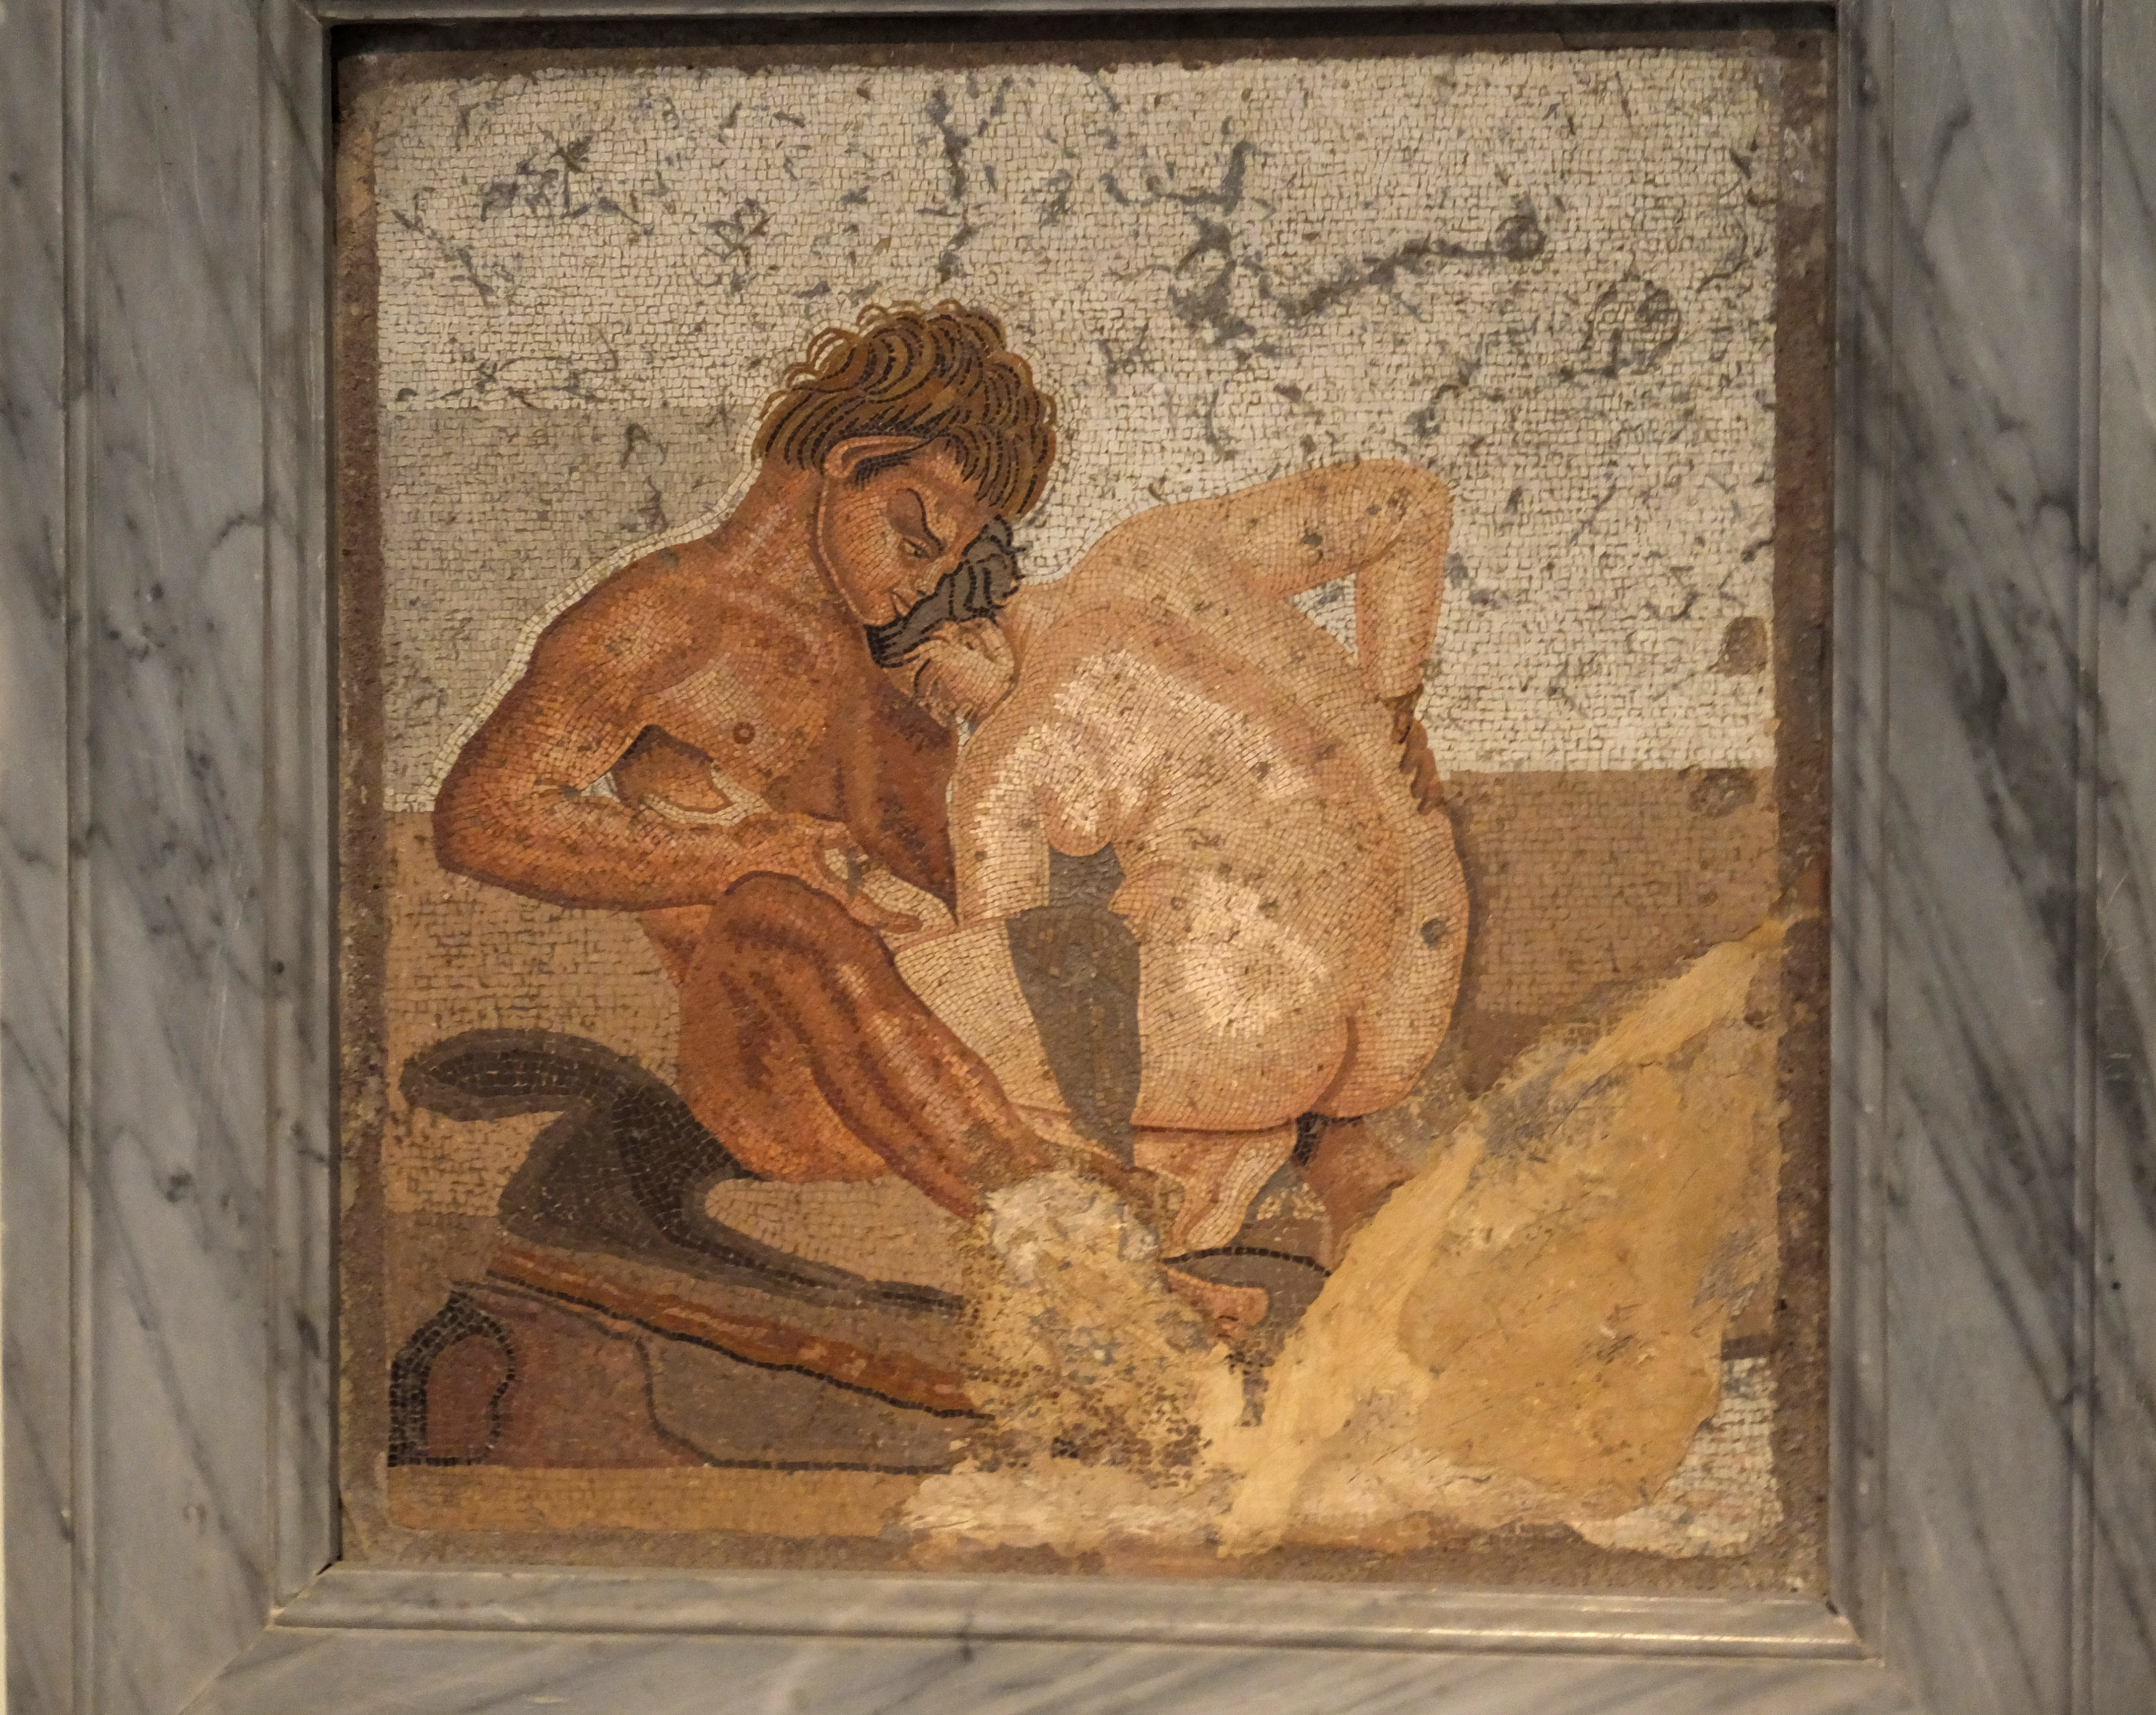 Drunk Sex Orgy Business Classy - Sexuality in ancient Rome - Wikipedia